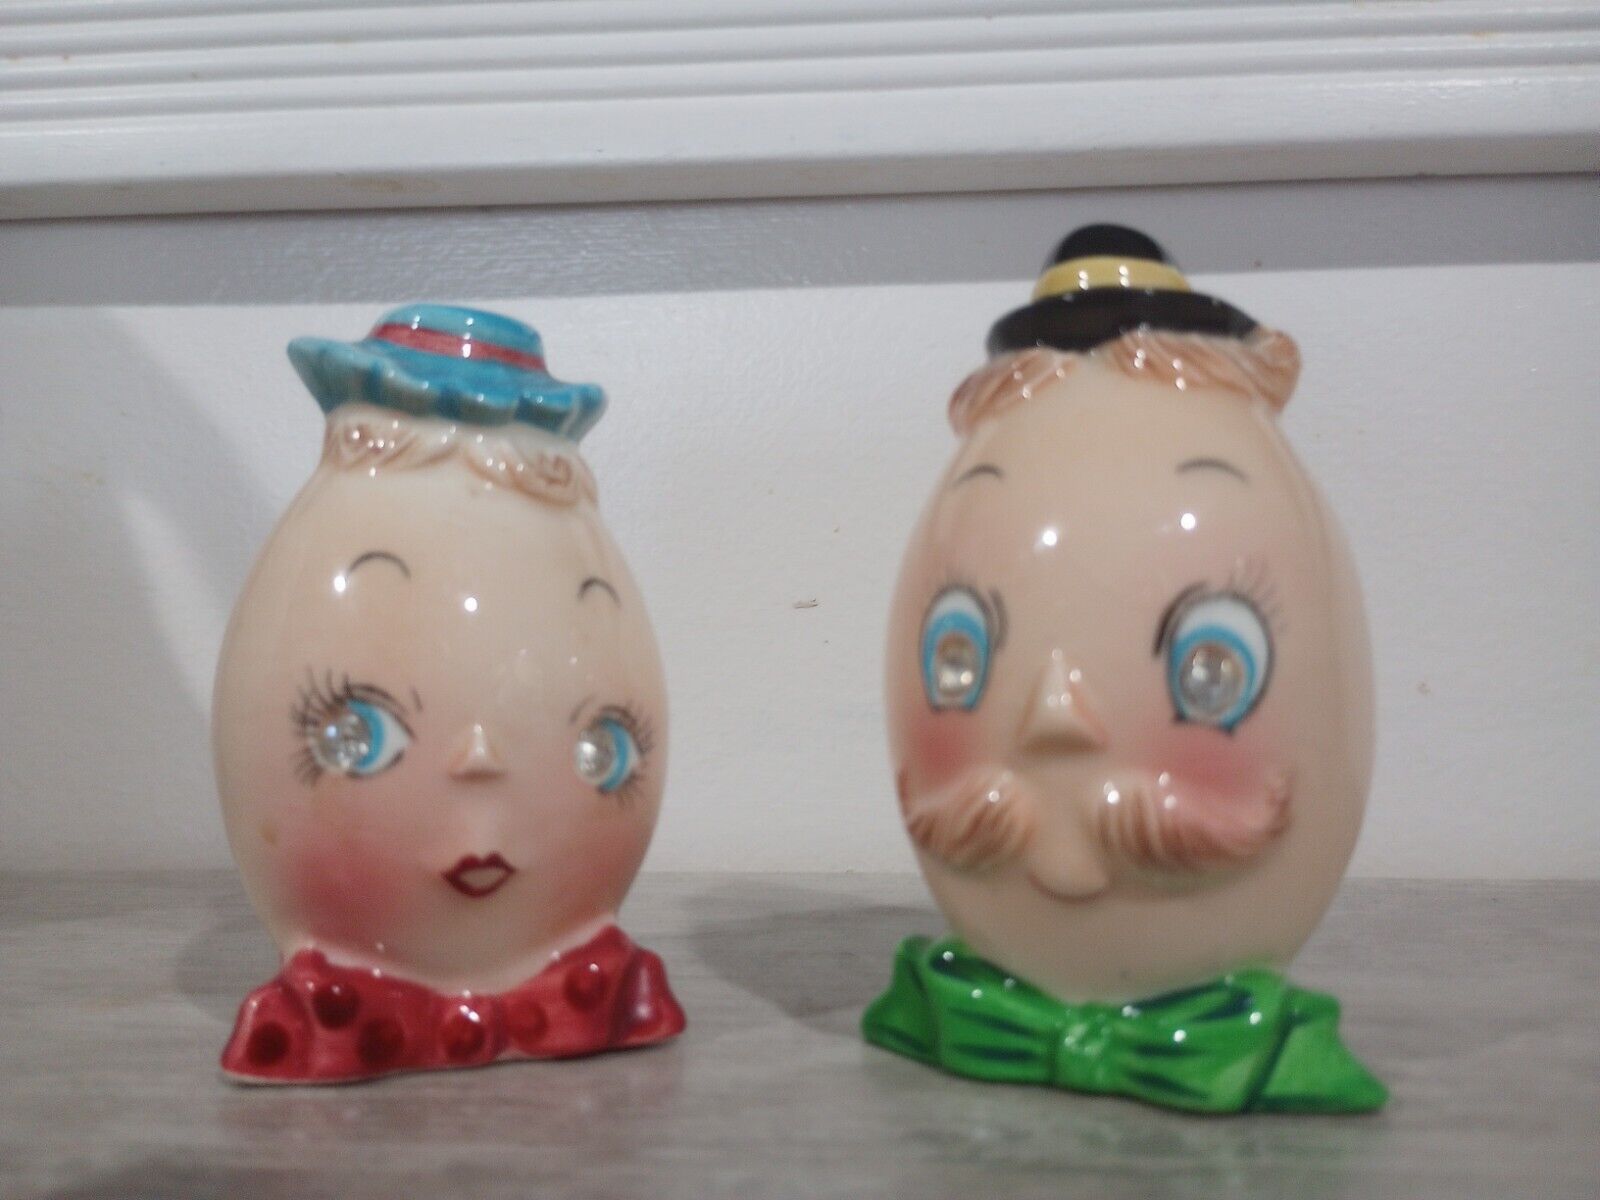 Rare Vintage PY Anthropomorphic Egg Head Couple Miyao Salt and Pepper Shakers